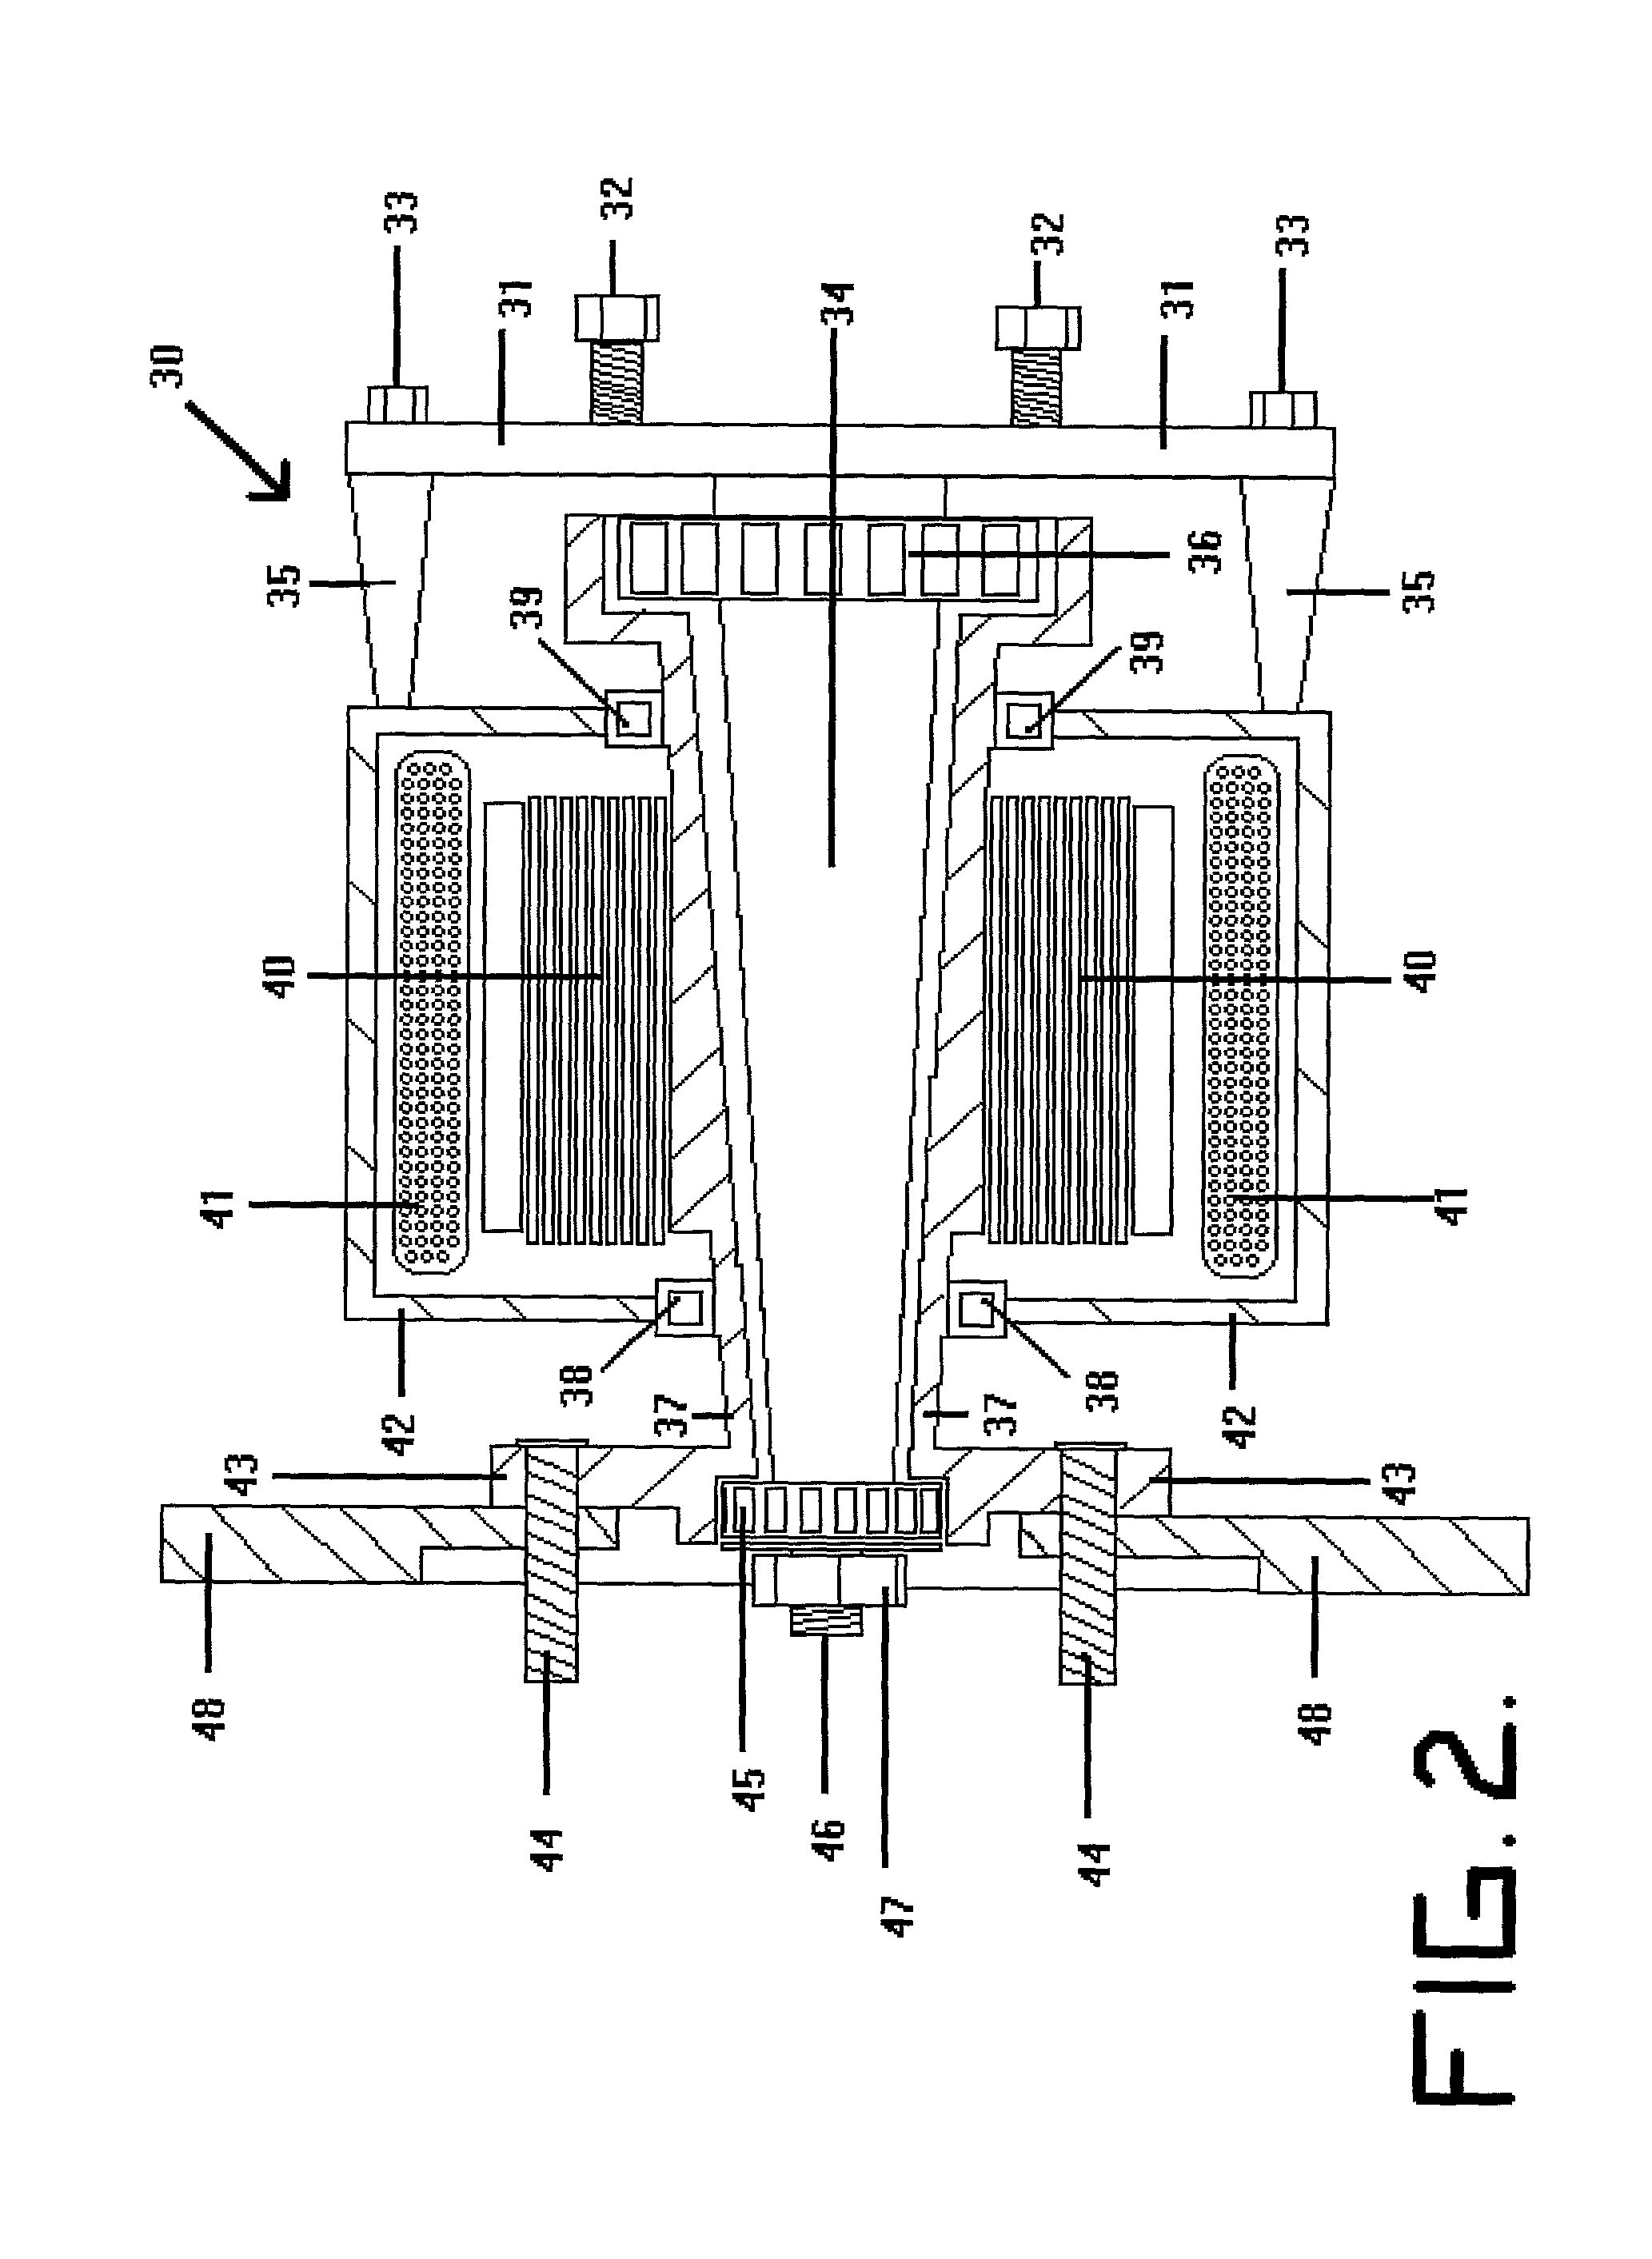 Electric power generation system for electric vehicles